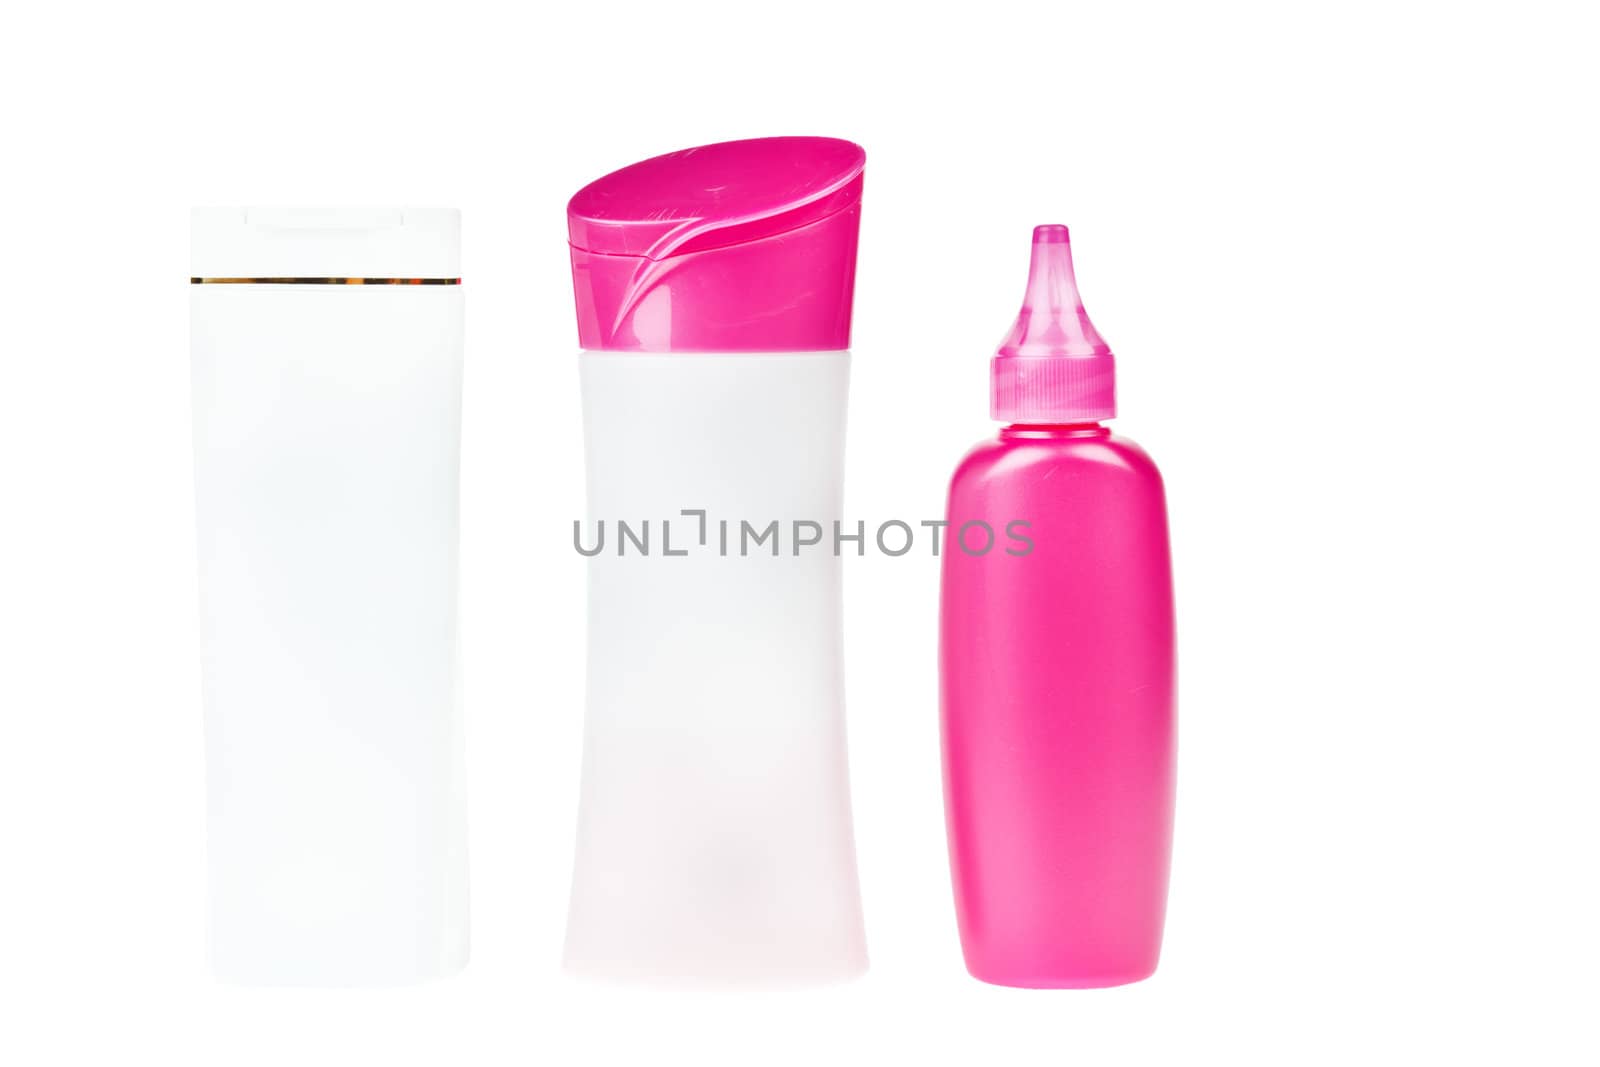 group of product packaging. isolated over white background